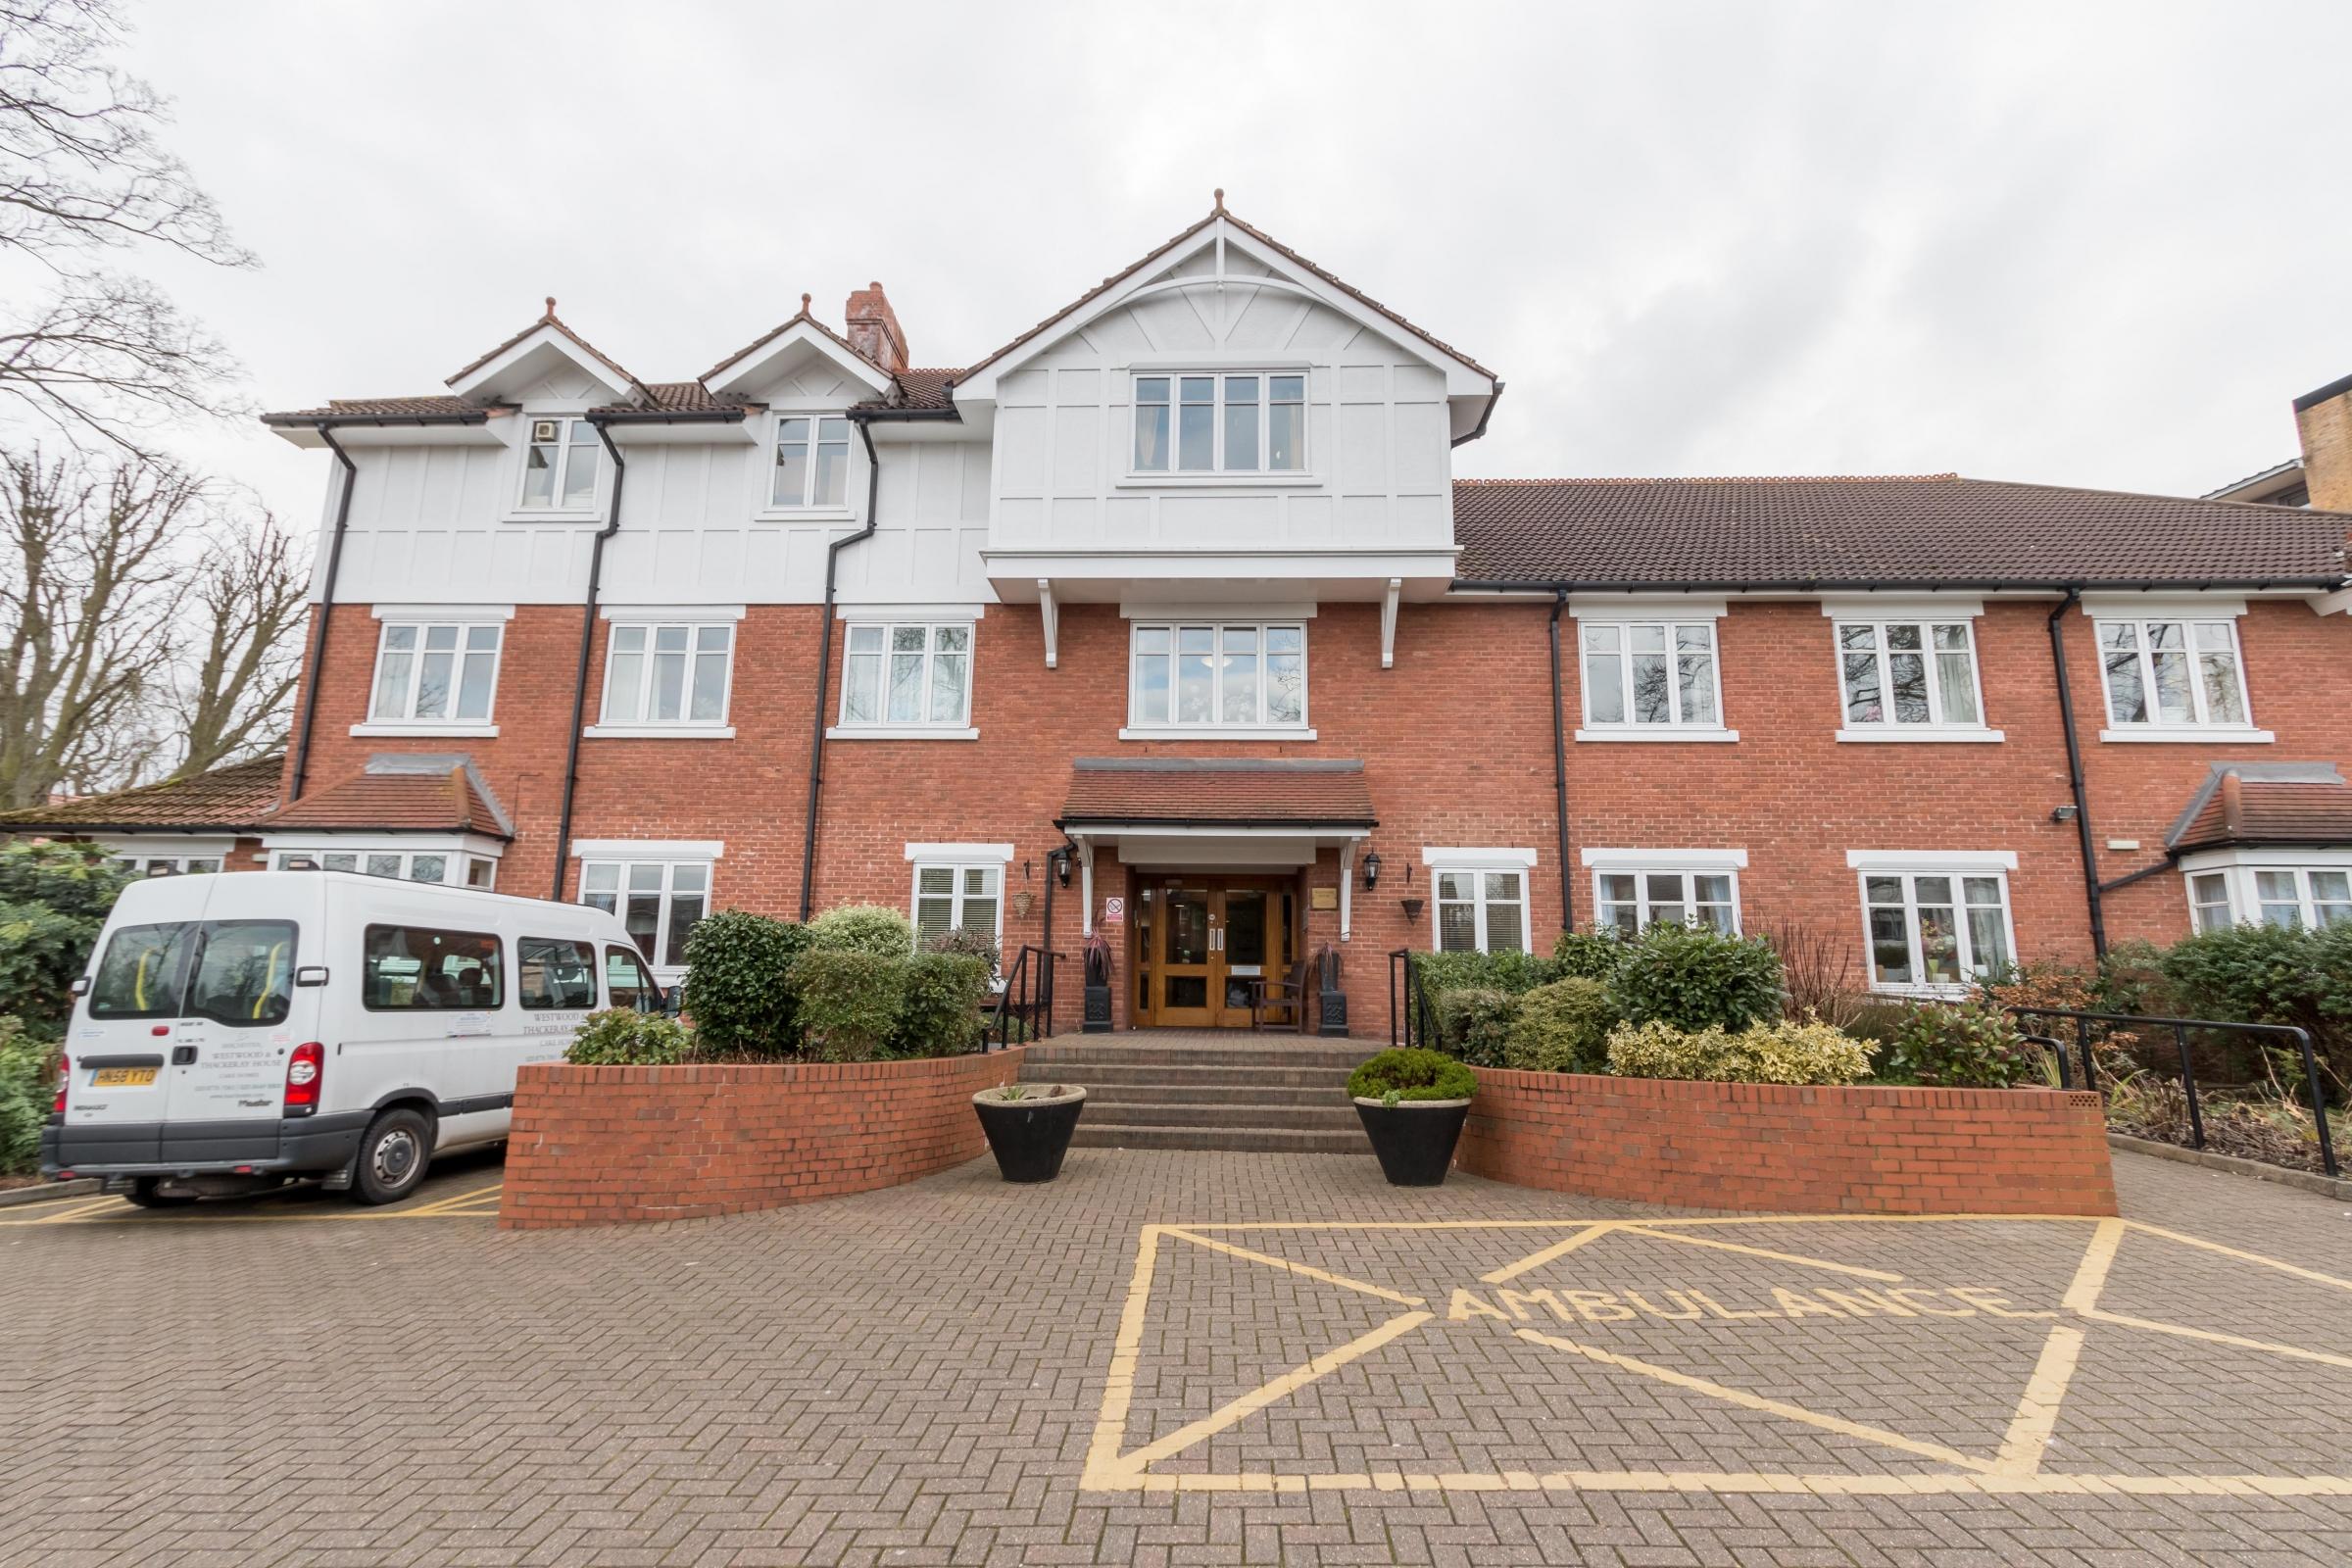 Westwood House Care Home